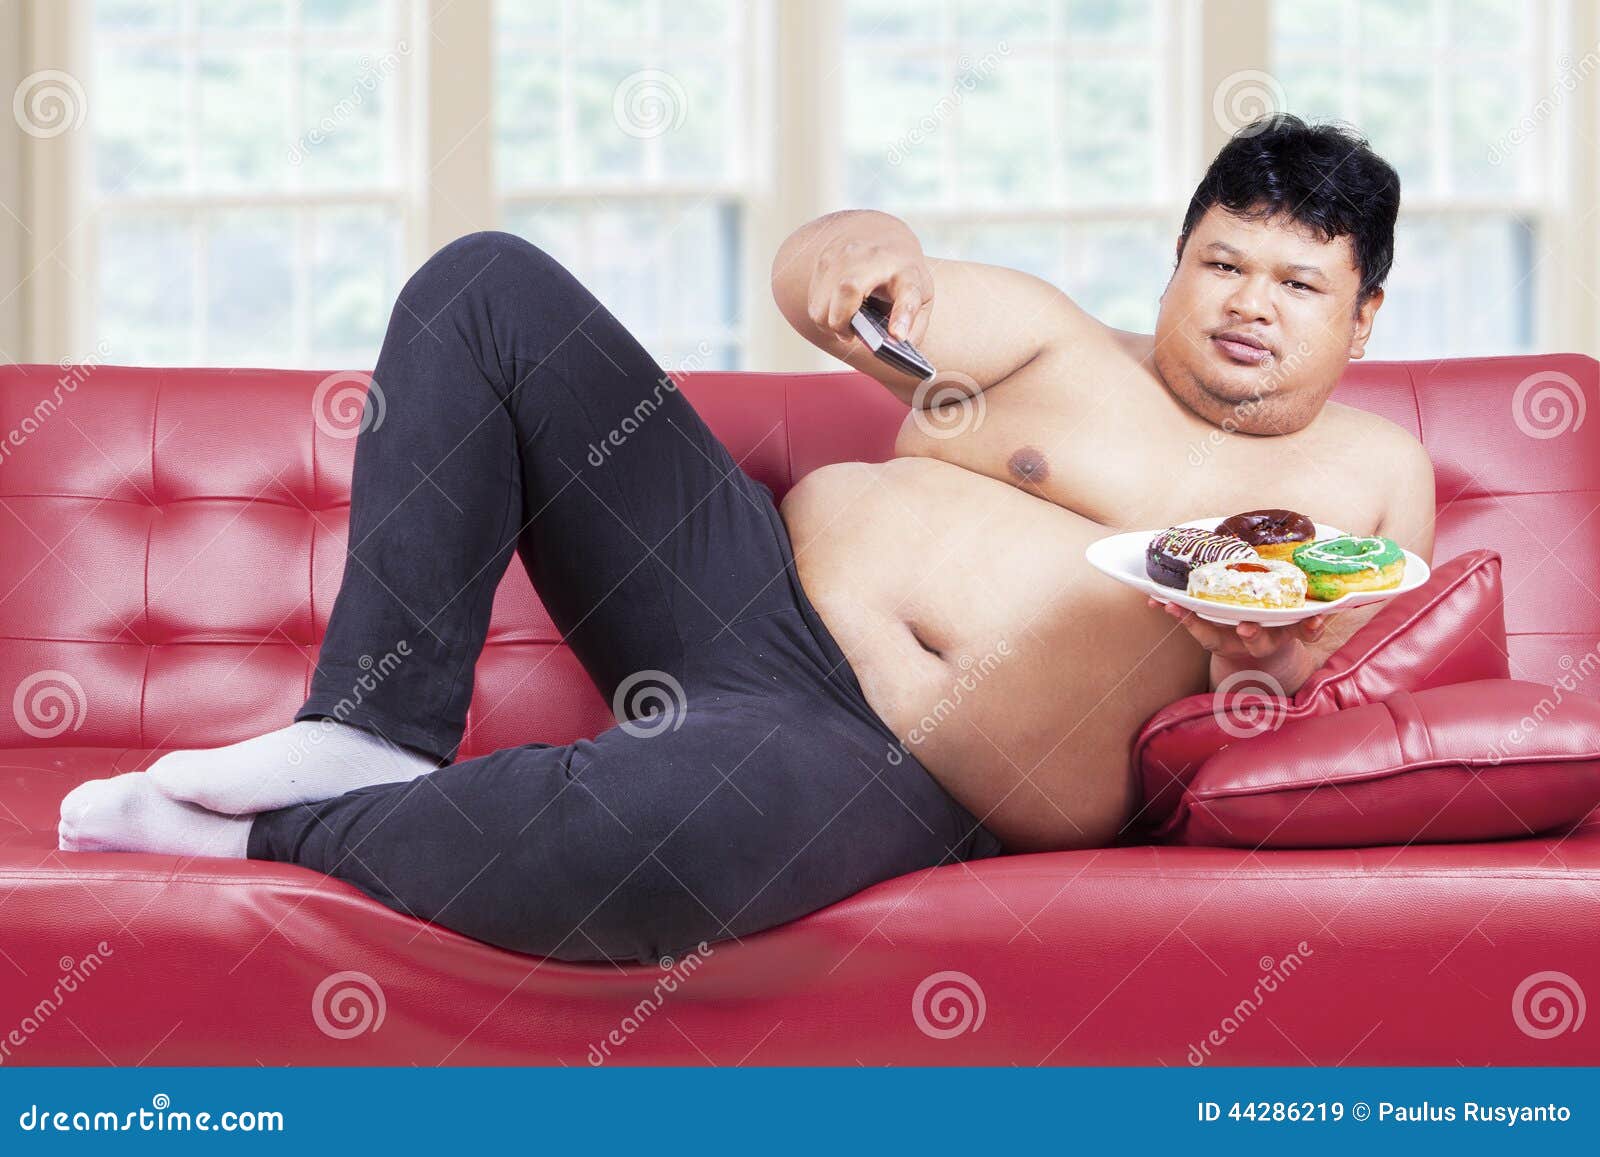 Person Sitting On Sofa With Donuts Stock Image Image Of Healthy